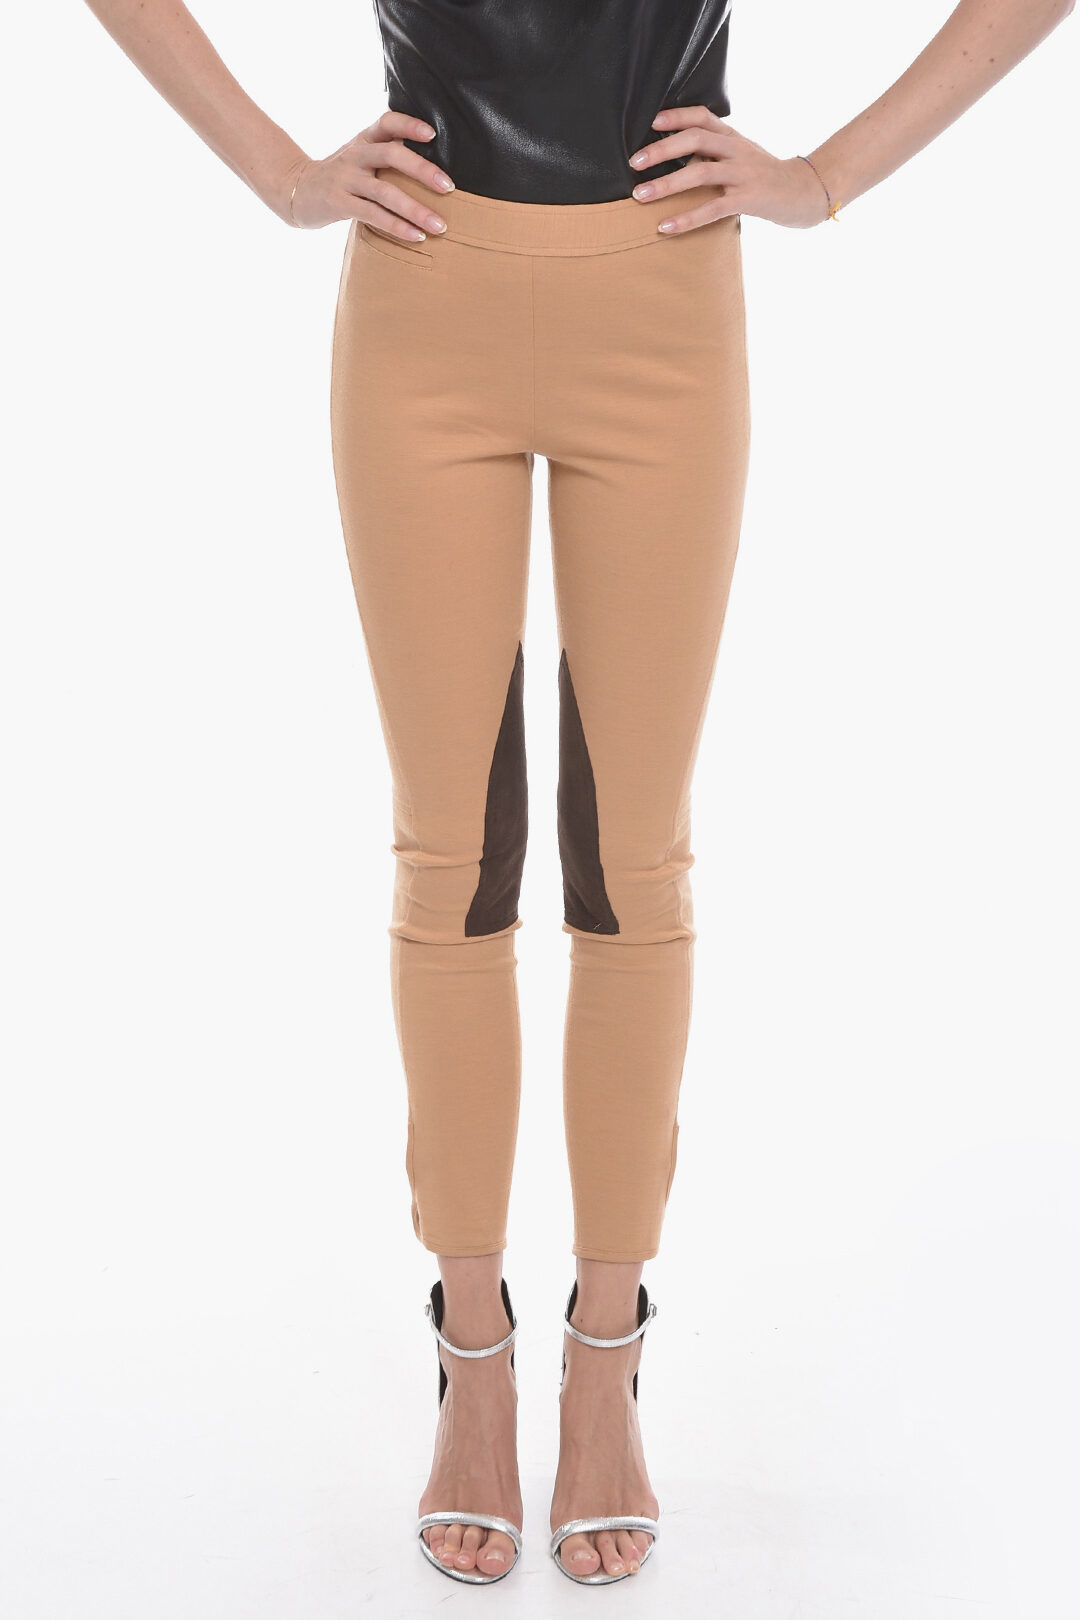 Adidas STELLA MCCARTNEY Stretch Fabric Leggings with Visible Stitching and  Heel Cut-out Detail women - Glamood Outlet